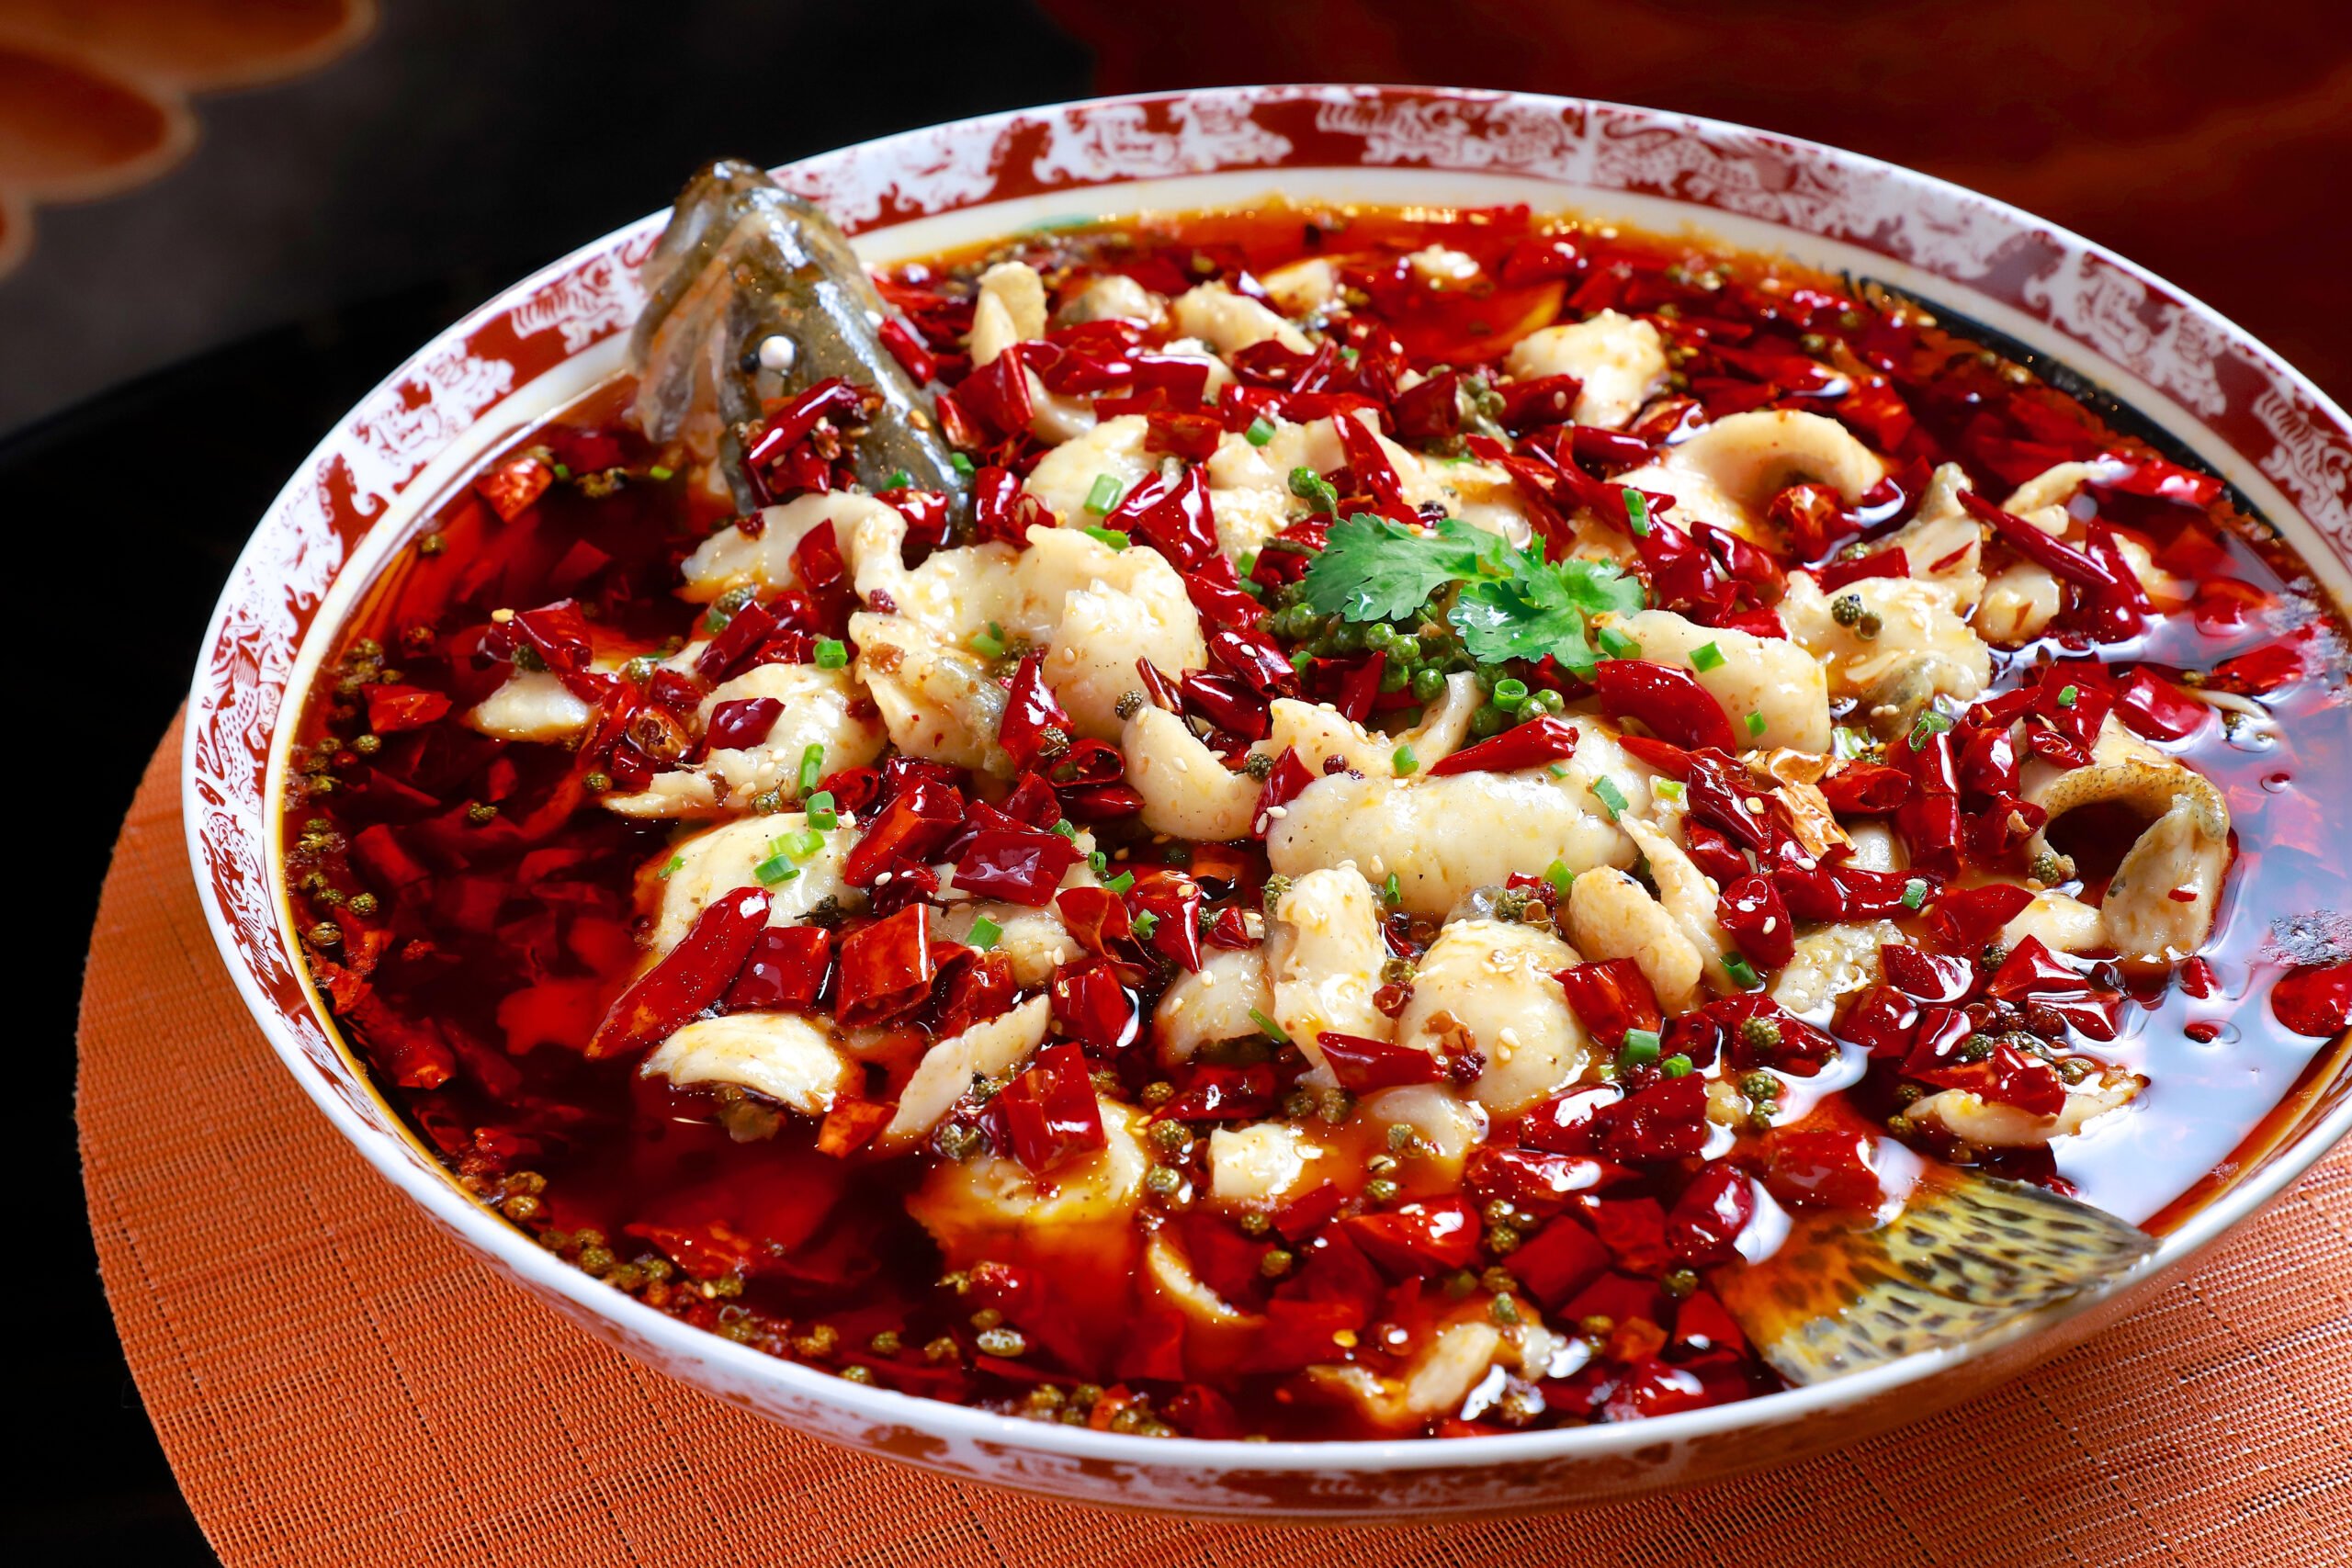 Taste The Traditional Hot Pot In Our China Private Impression 14 Day Package